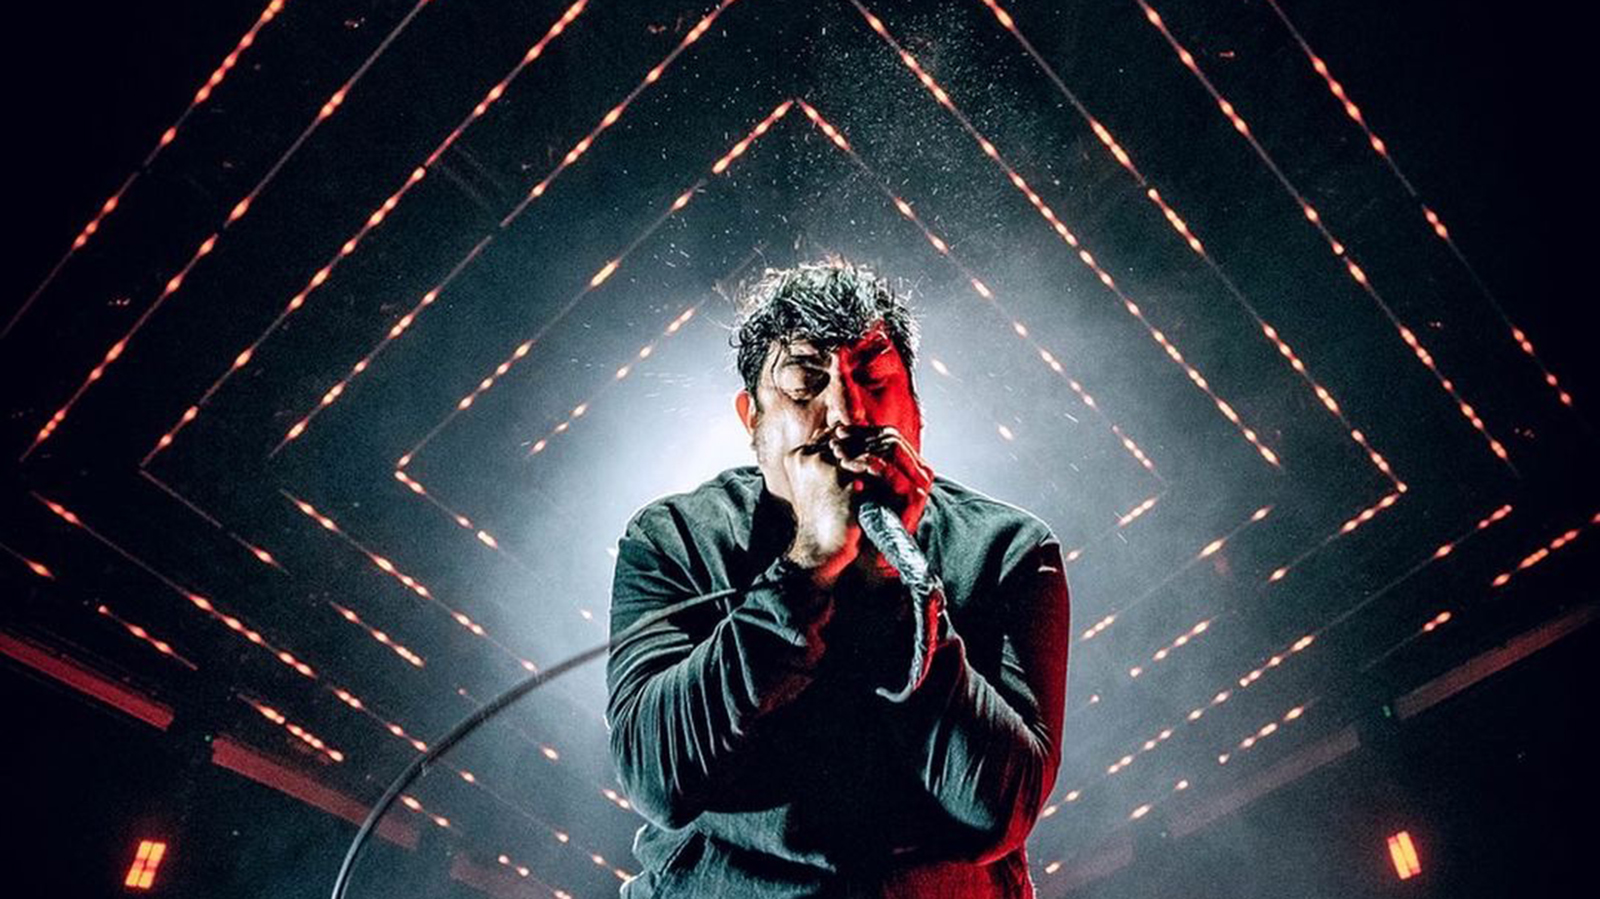 Deftones tour US and Europe with GLP JDC1 and Scenex Lighting LED Pixel